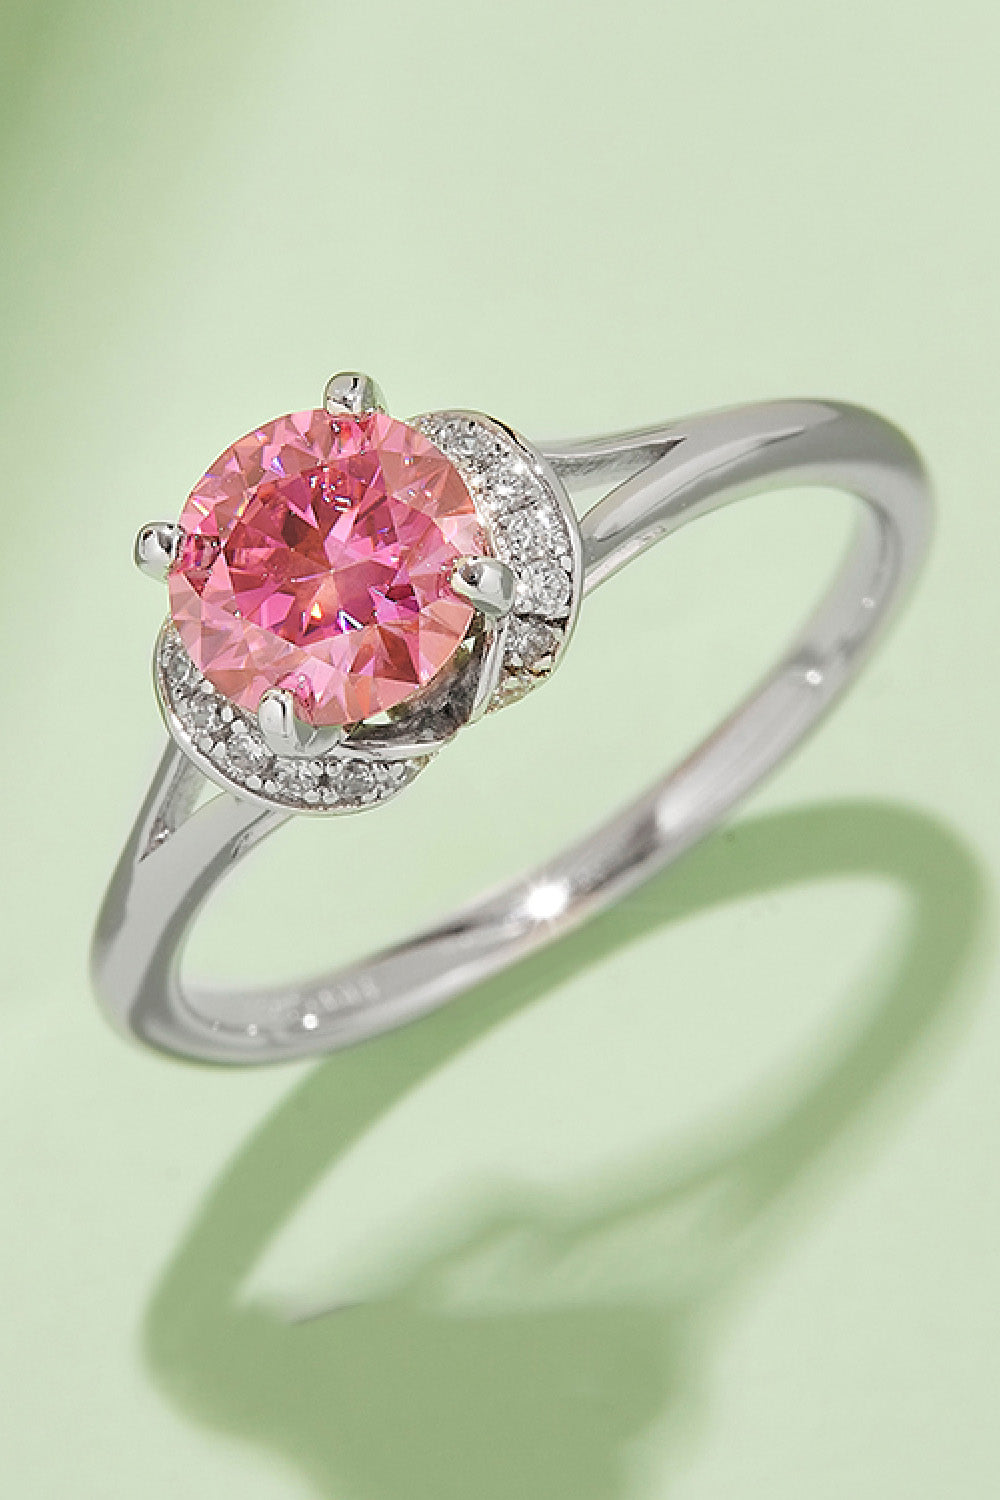 1 Carat Moissanite 4-Prong 925 Sterling Silver Ring Hot Pink